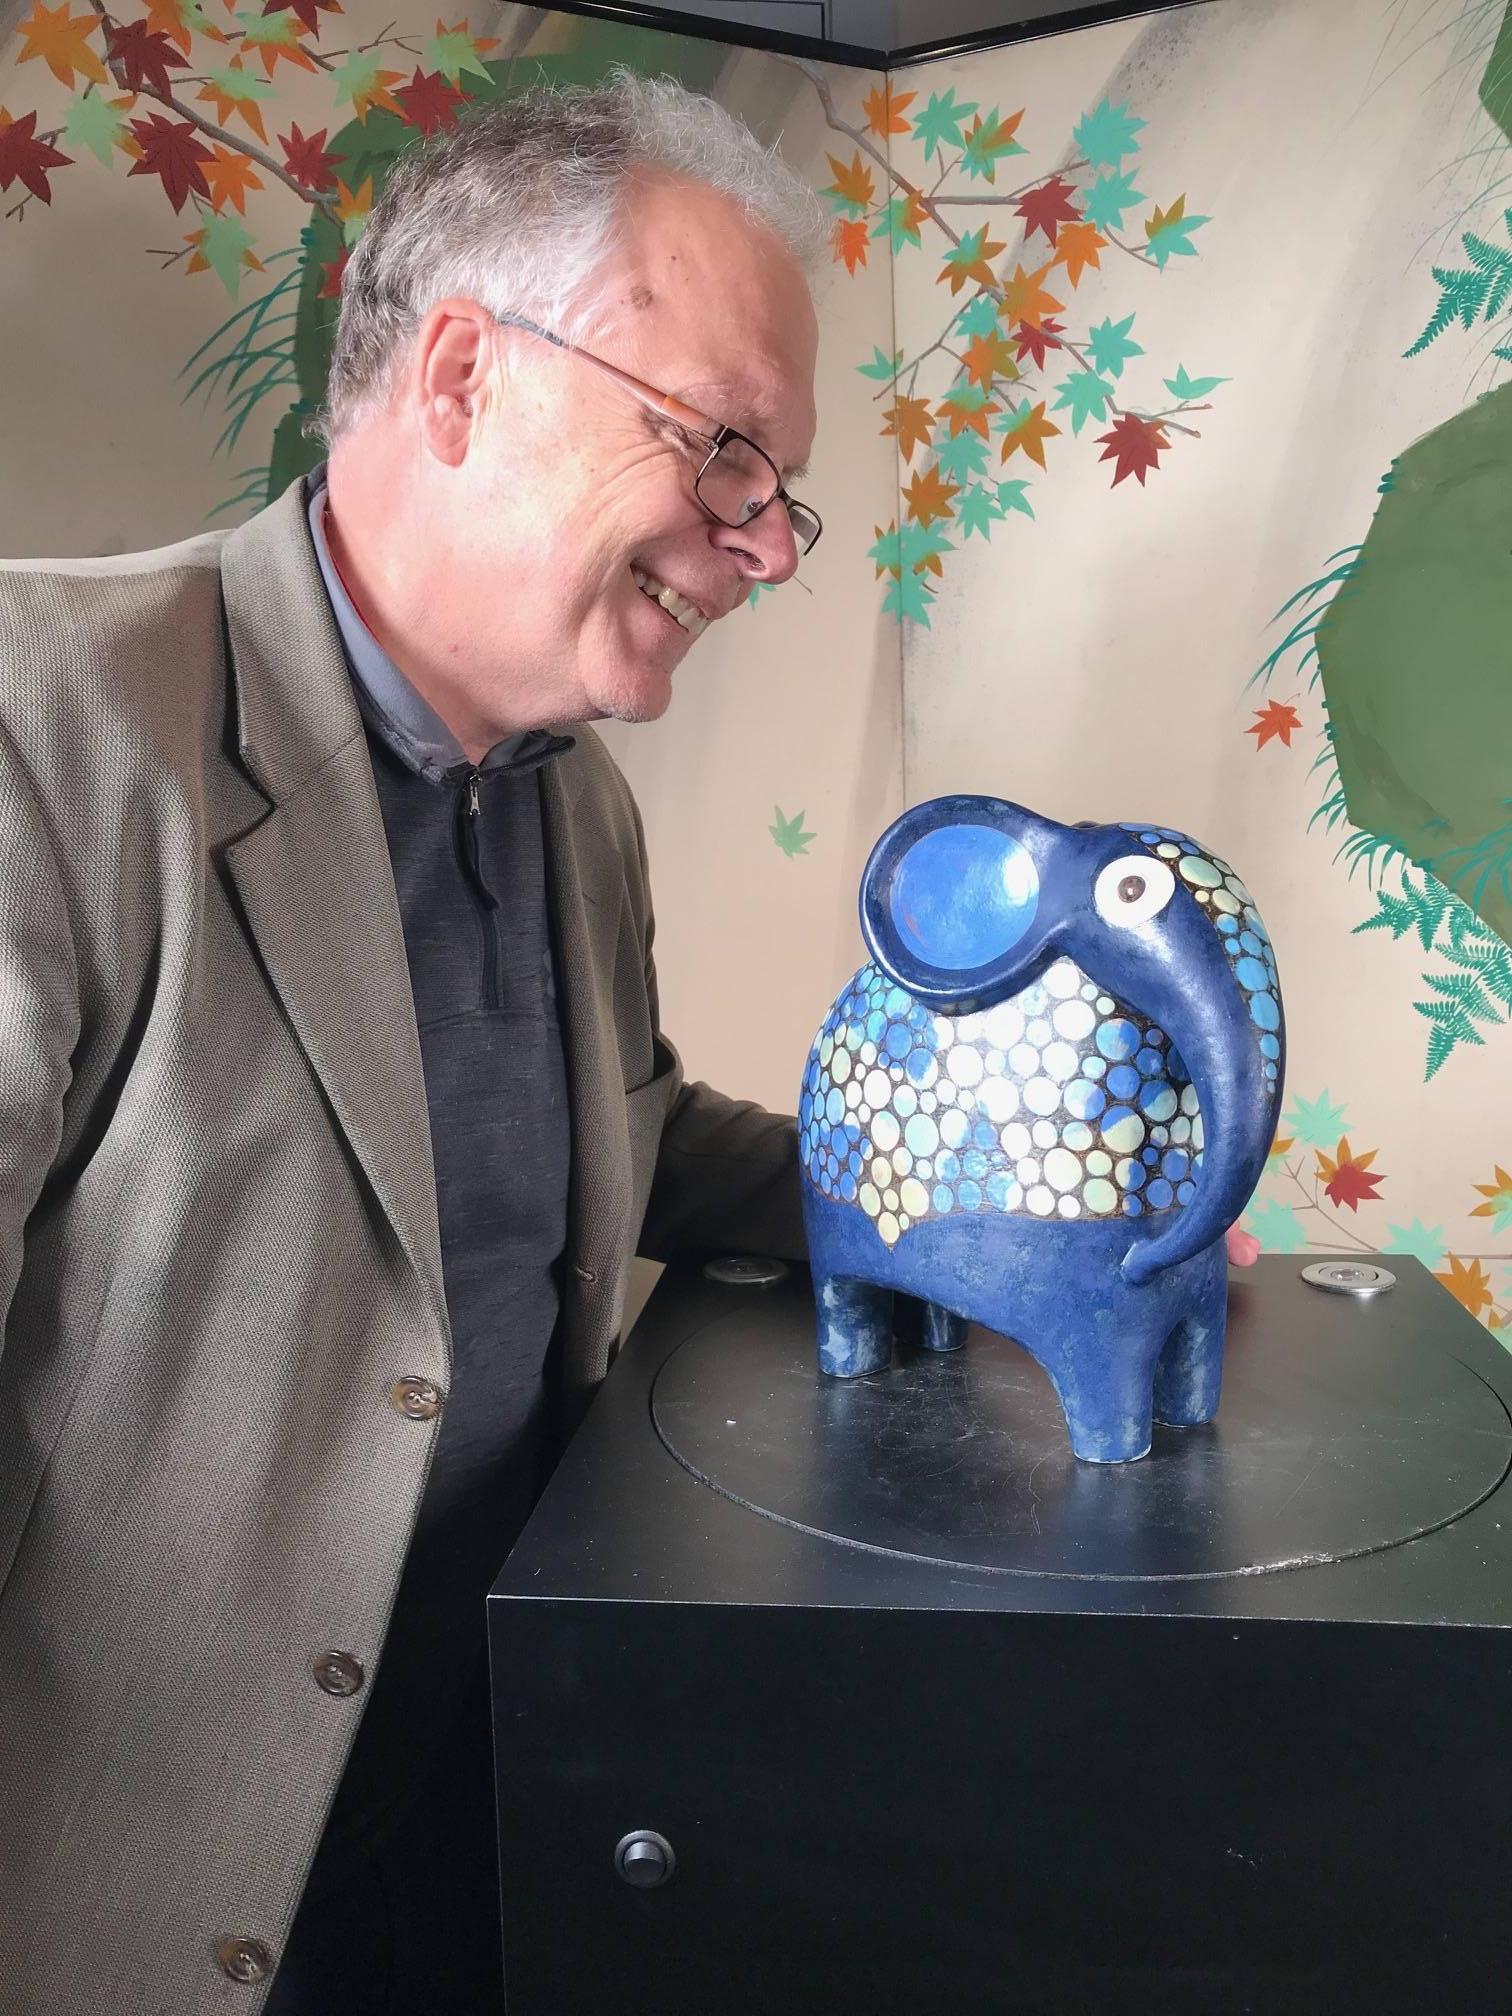 Tall handmade and hand-painted blue spotted elephant sculpture handcrafted and hand-painted in beautiful colors by master designer Eva Fritz-Lindner (1933-2017)

Her stamp i3D, circa 1960-1970.

Glaze: The matte colors are bright and vivid and